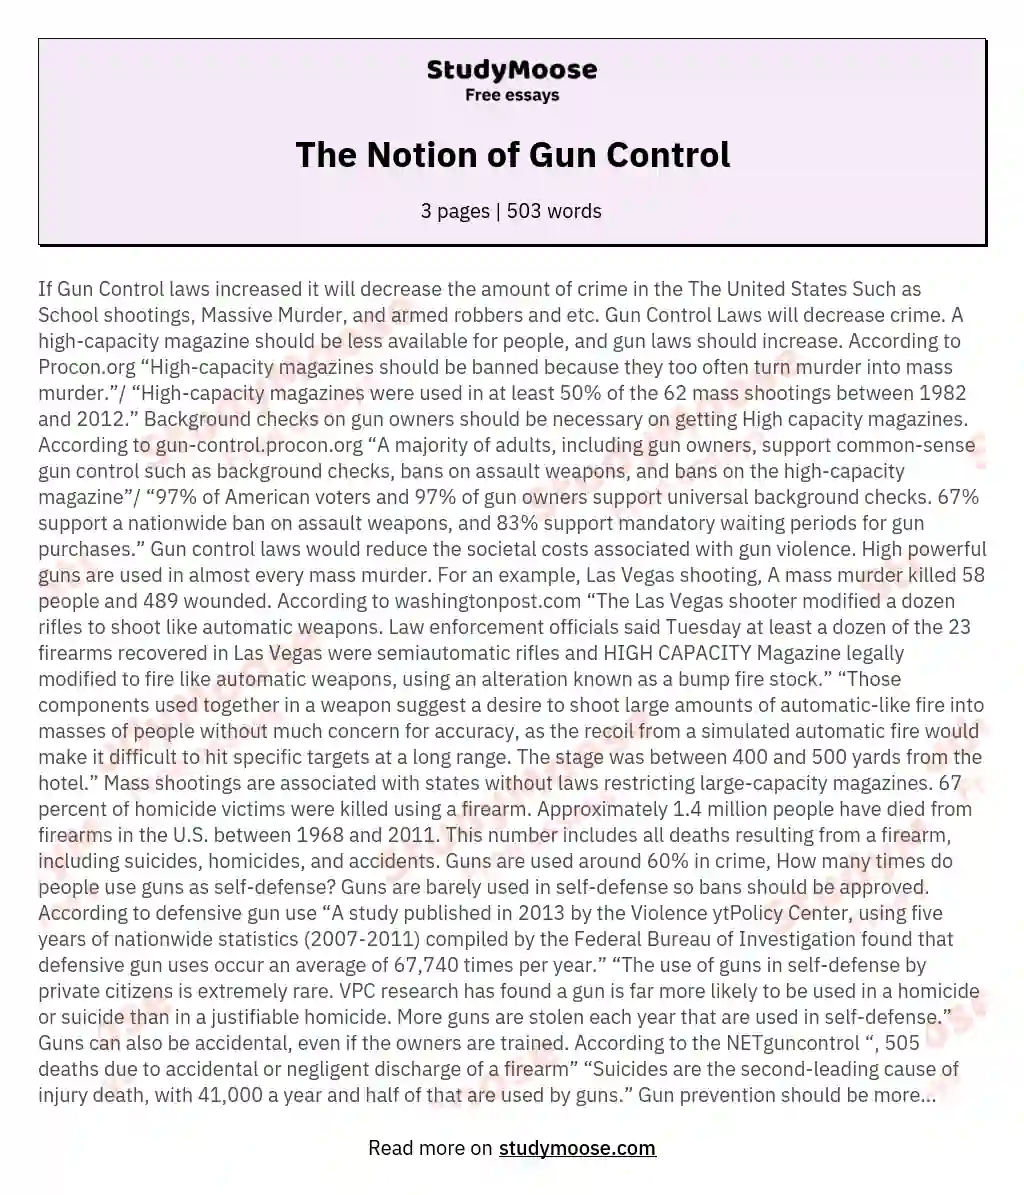 The Notion of Gun Control